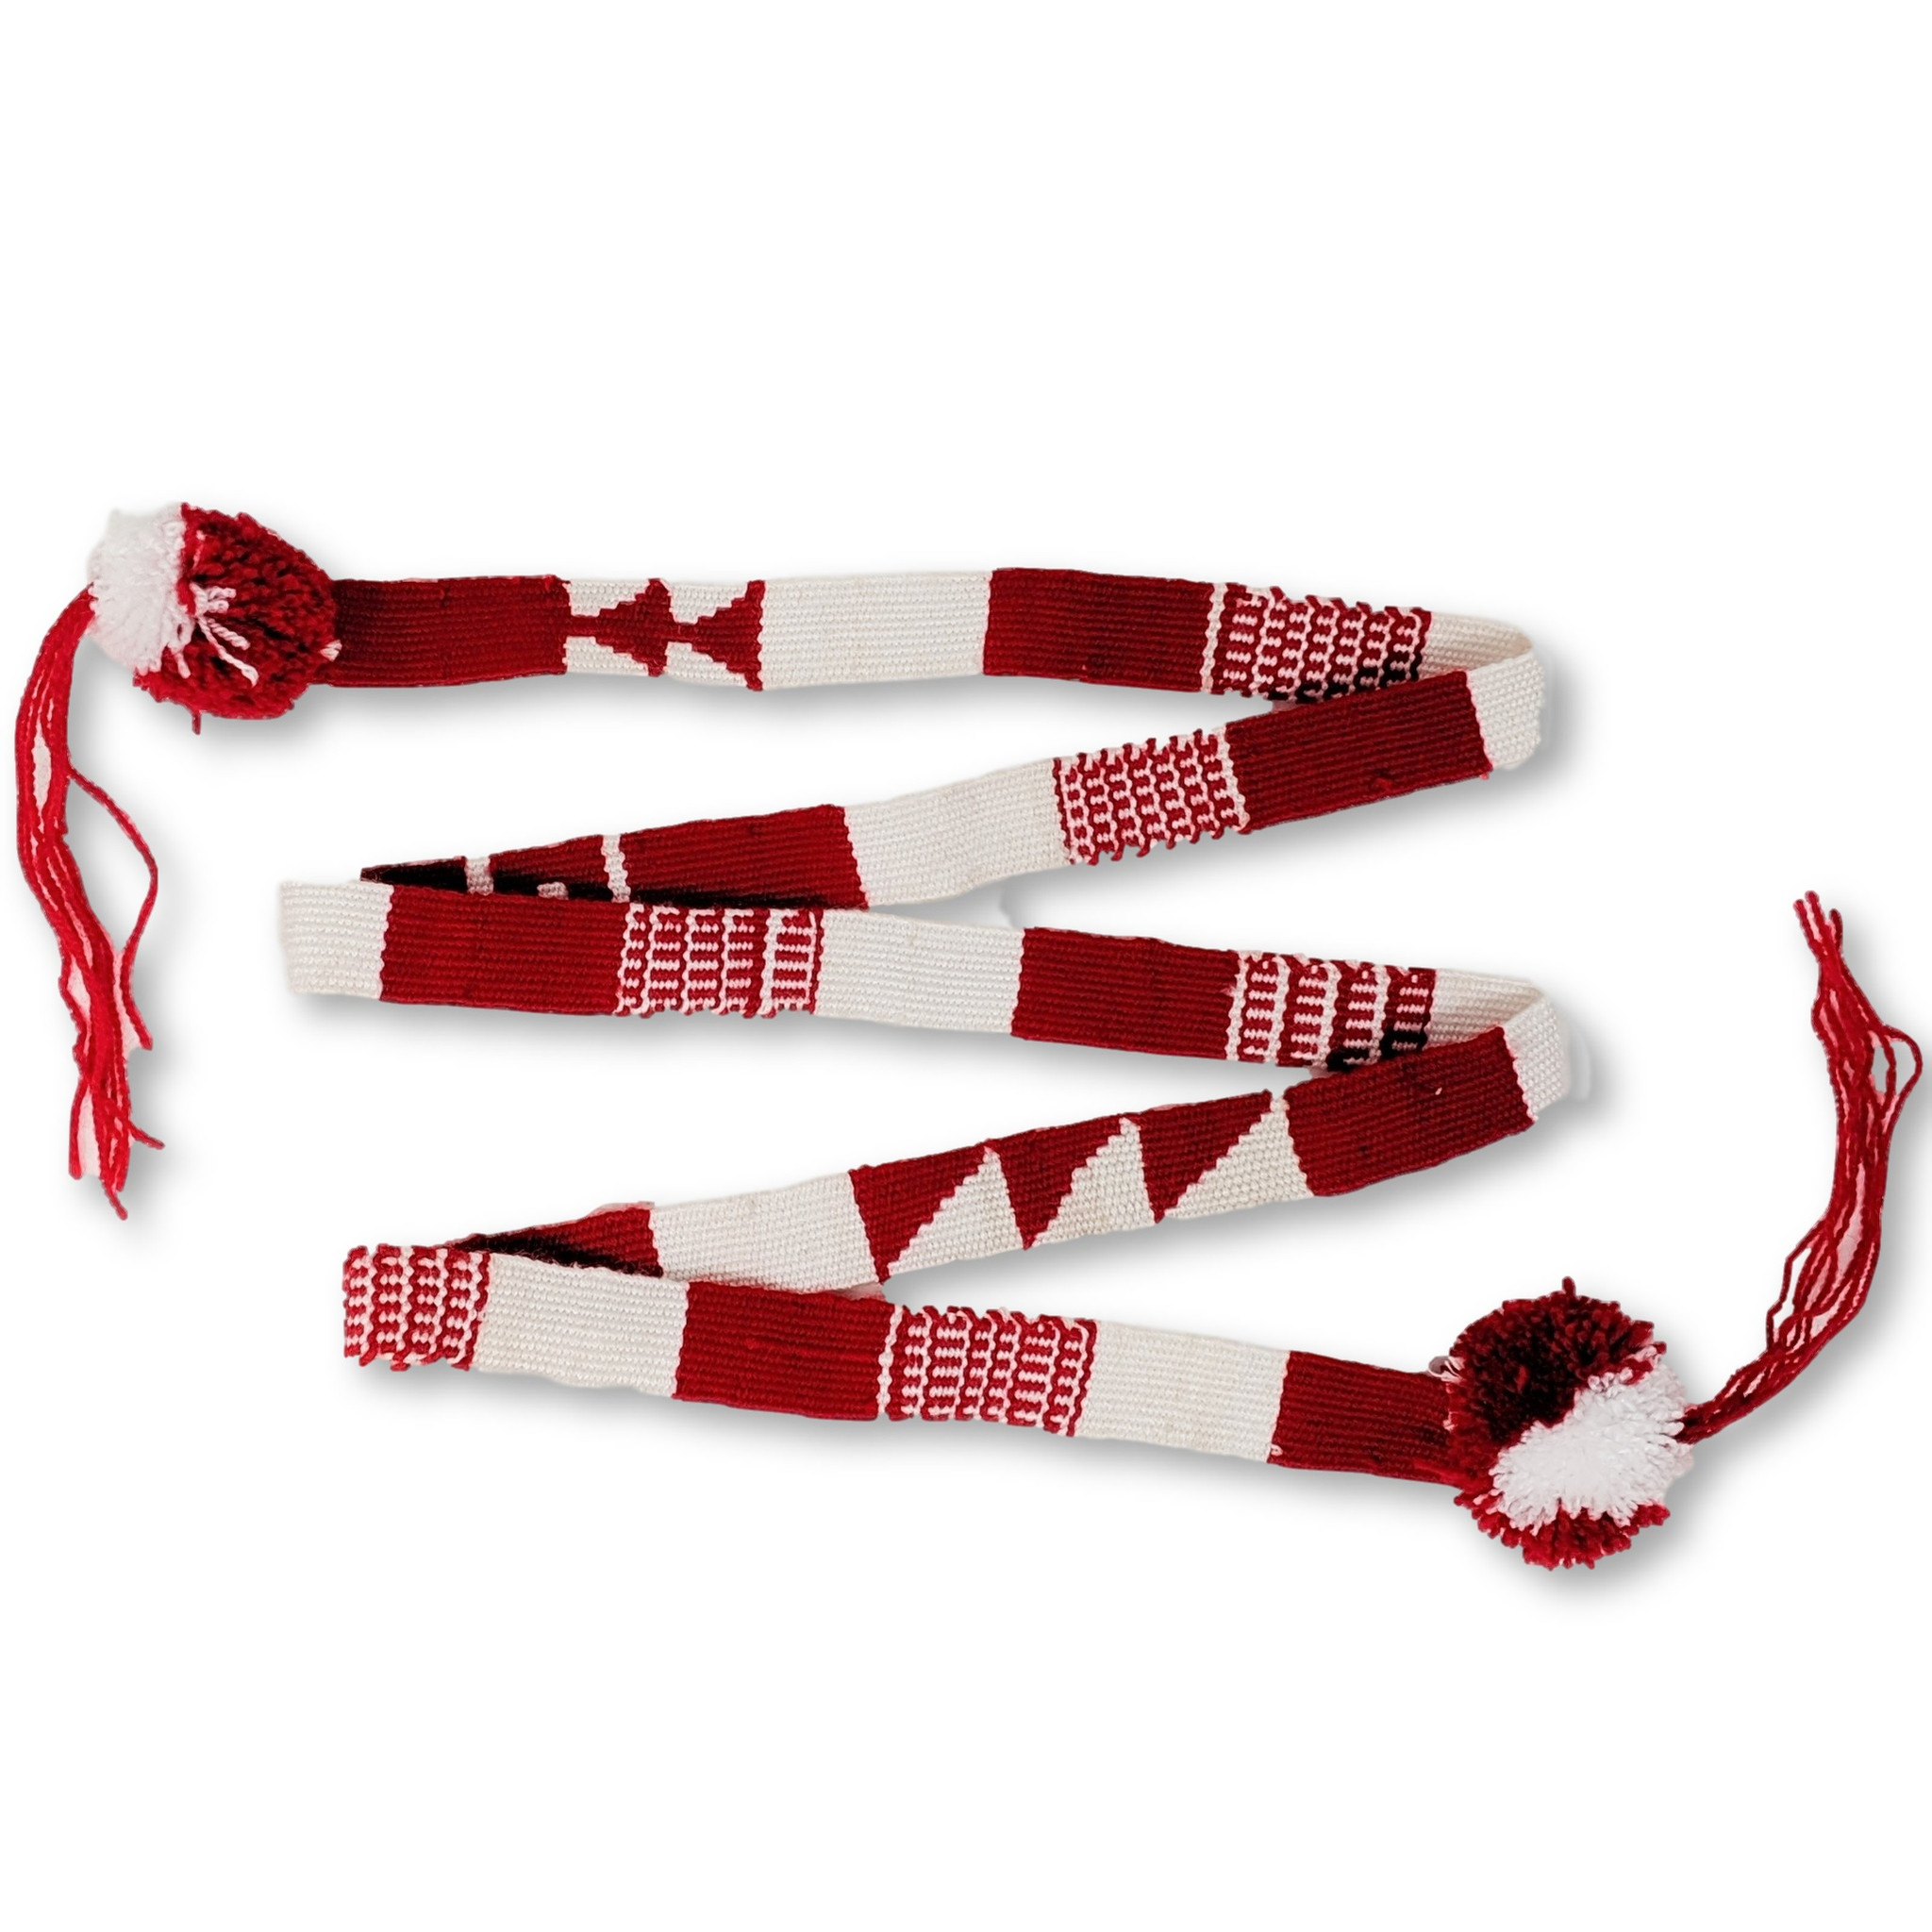 White-and-red sash with a bow, gold tassels